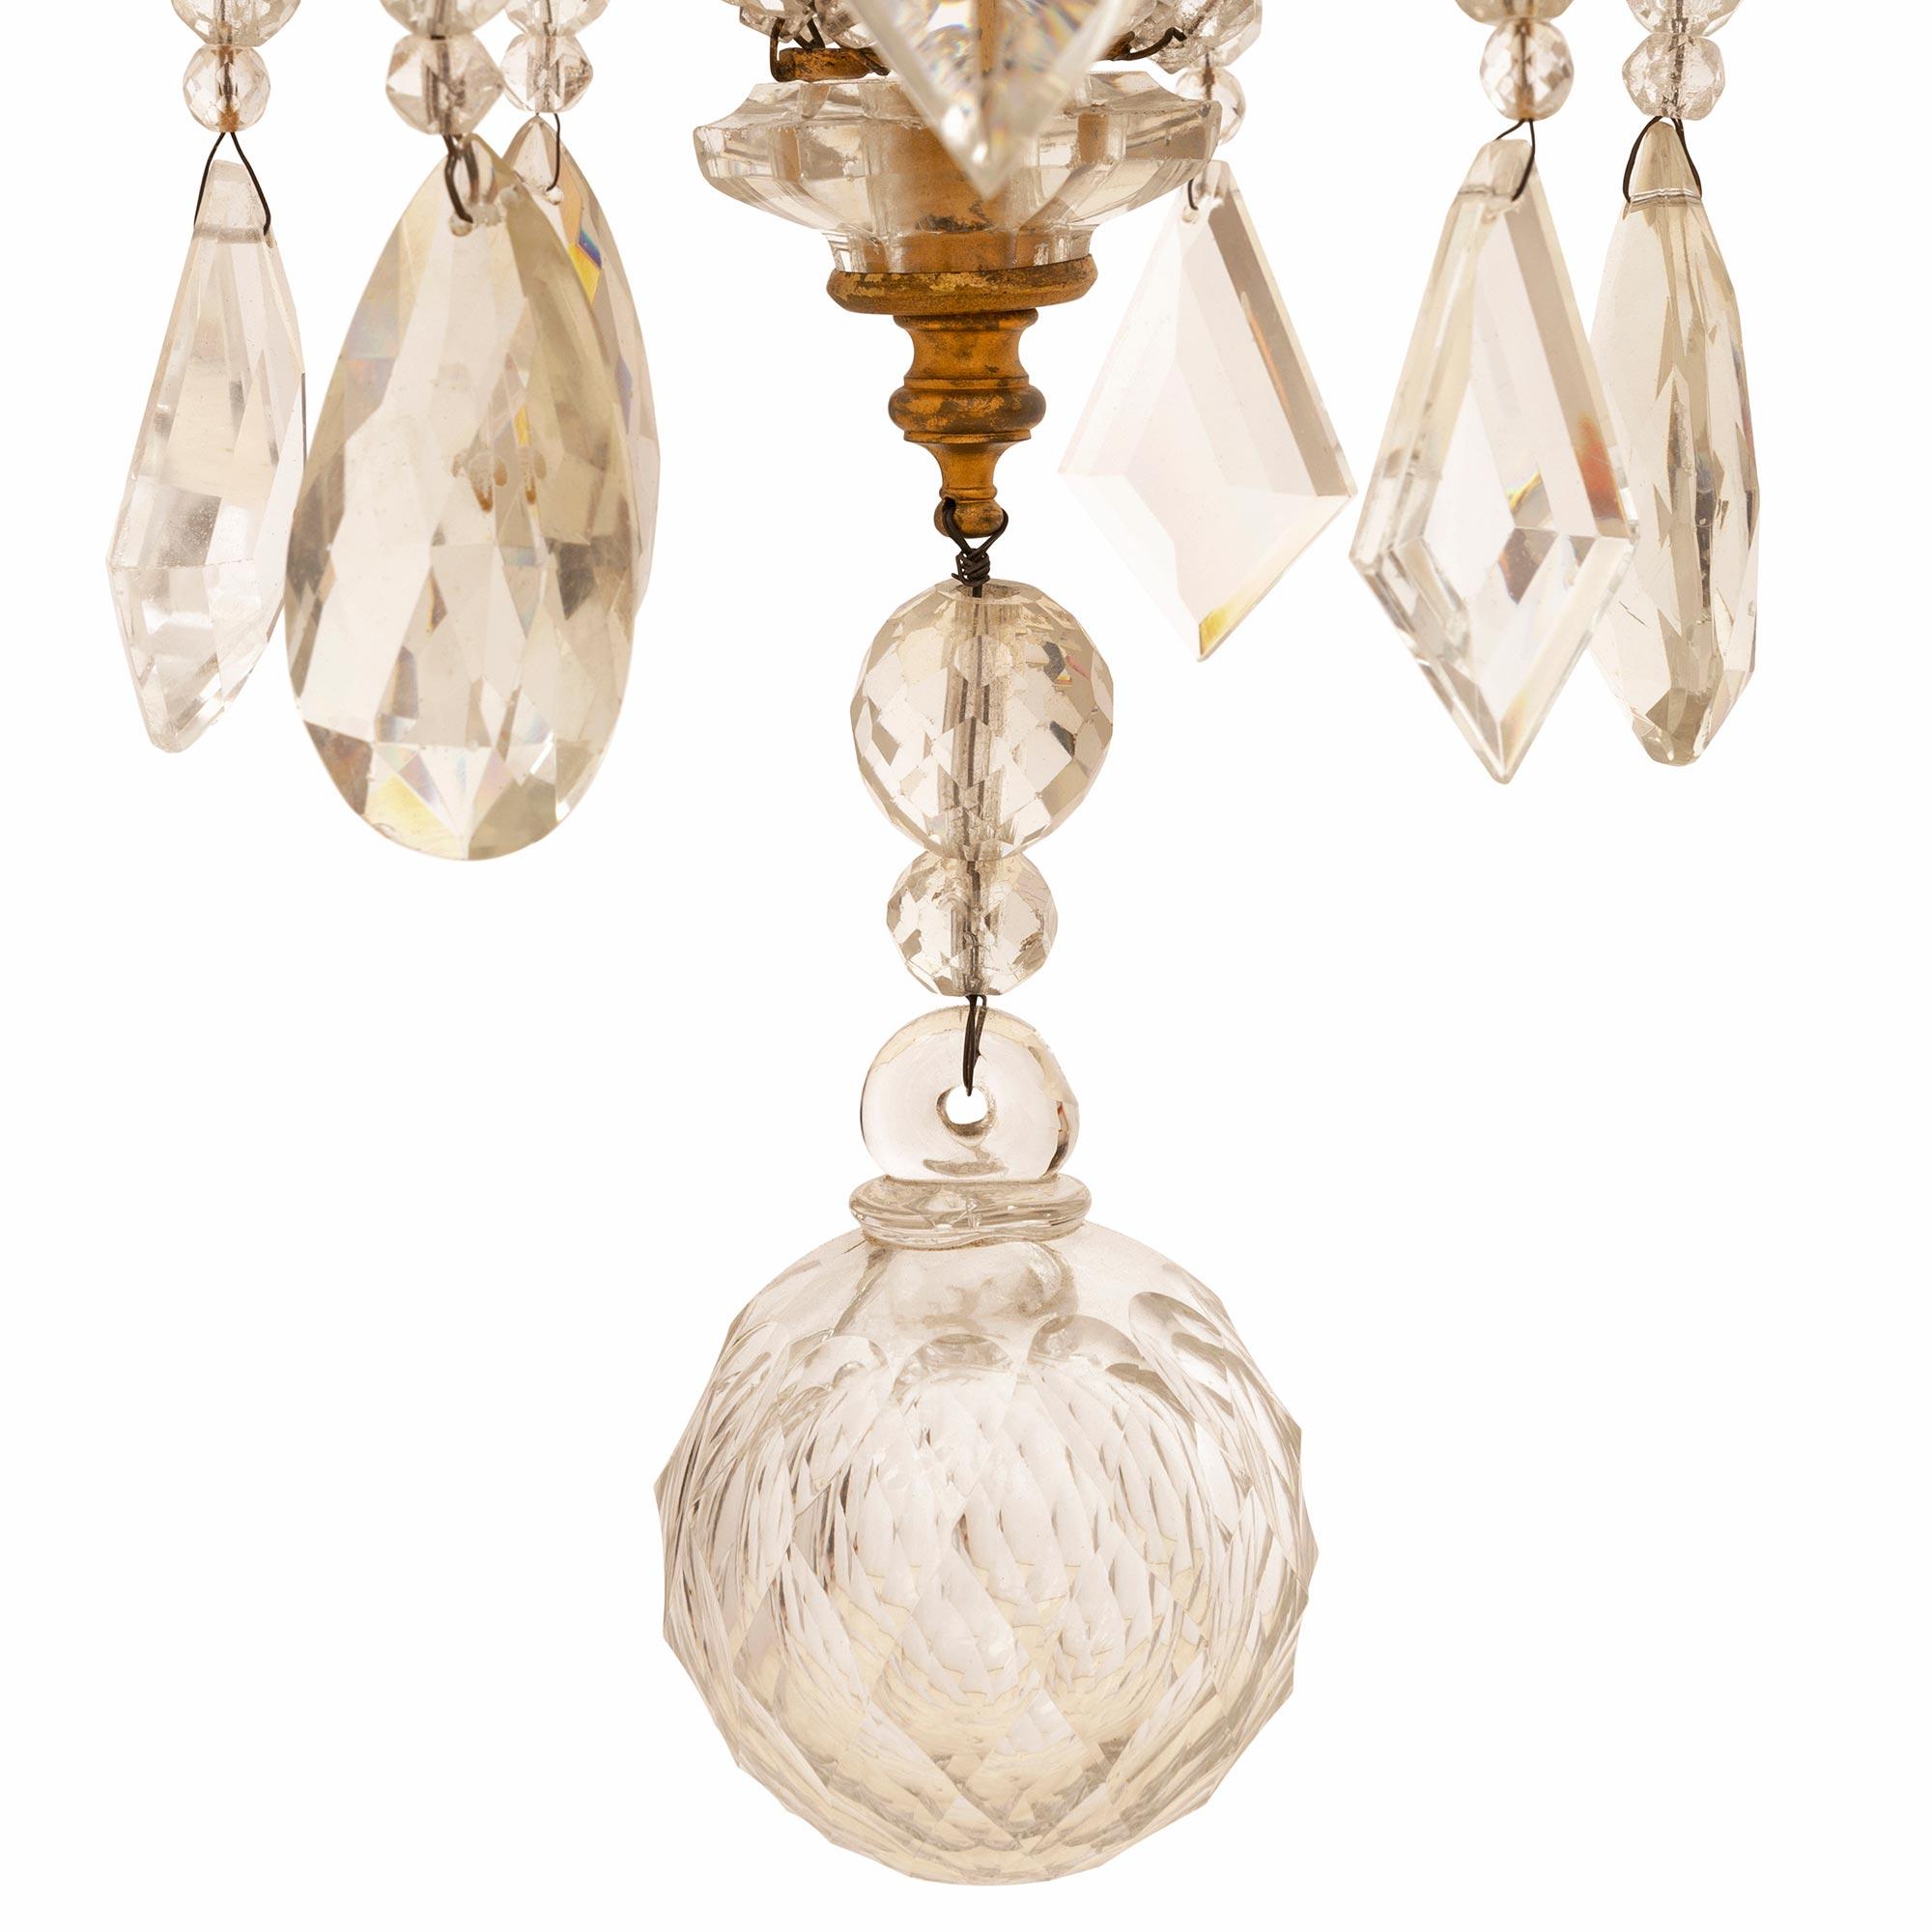 Italian Early 19th Century Crystal Chandelier from the Torino Region For Sale 4